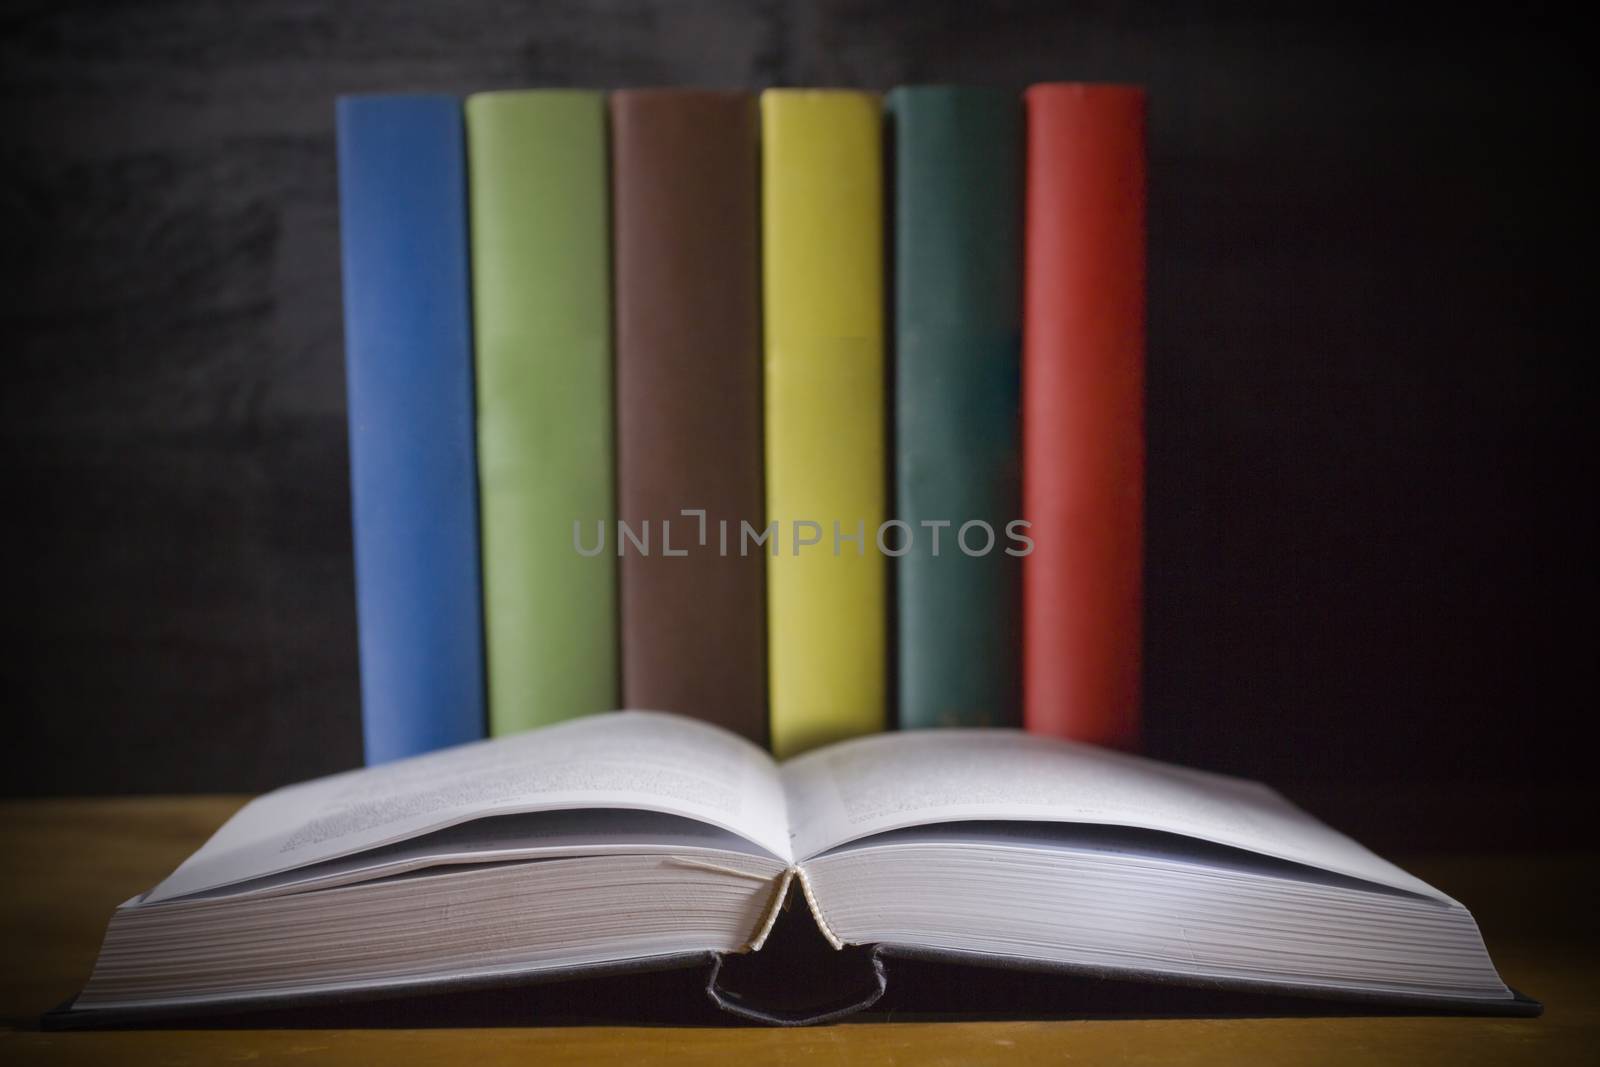 Open book and colorful books on a wooden table